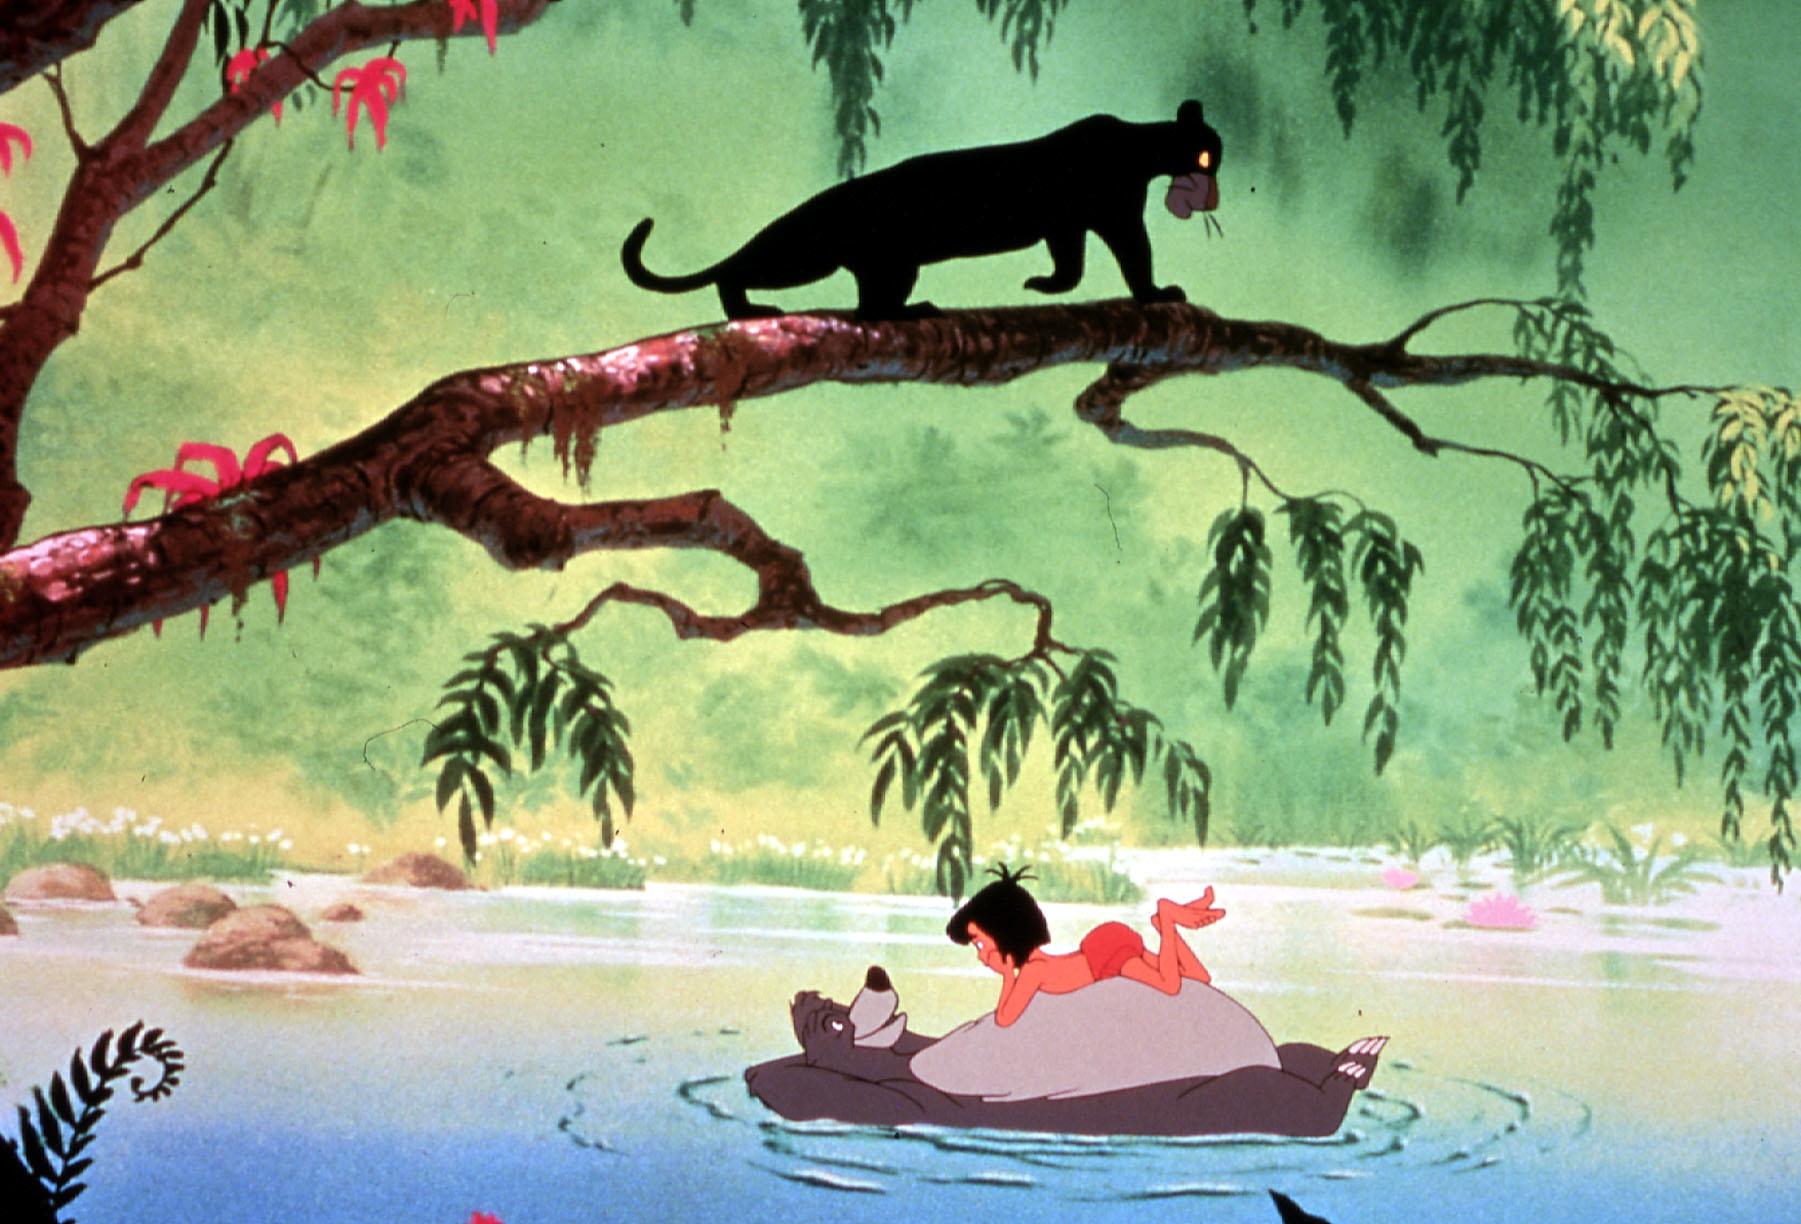 Still from 'The Jungle Book', 1967